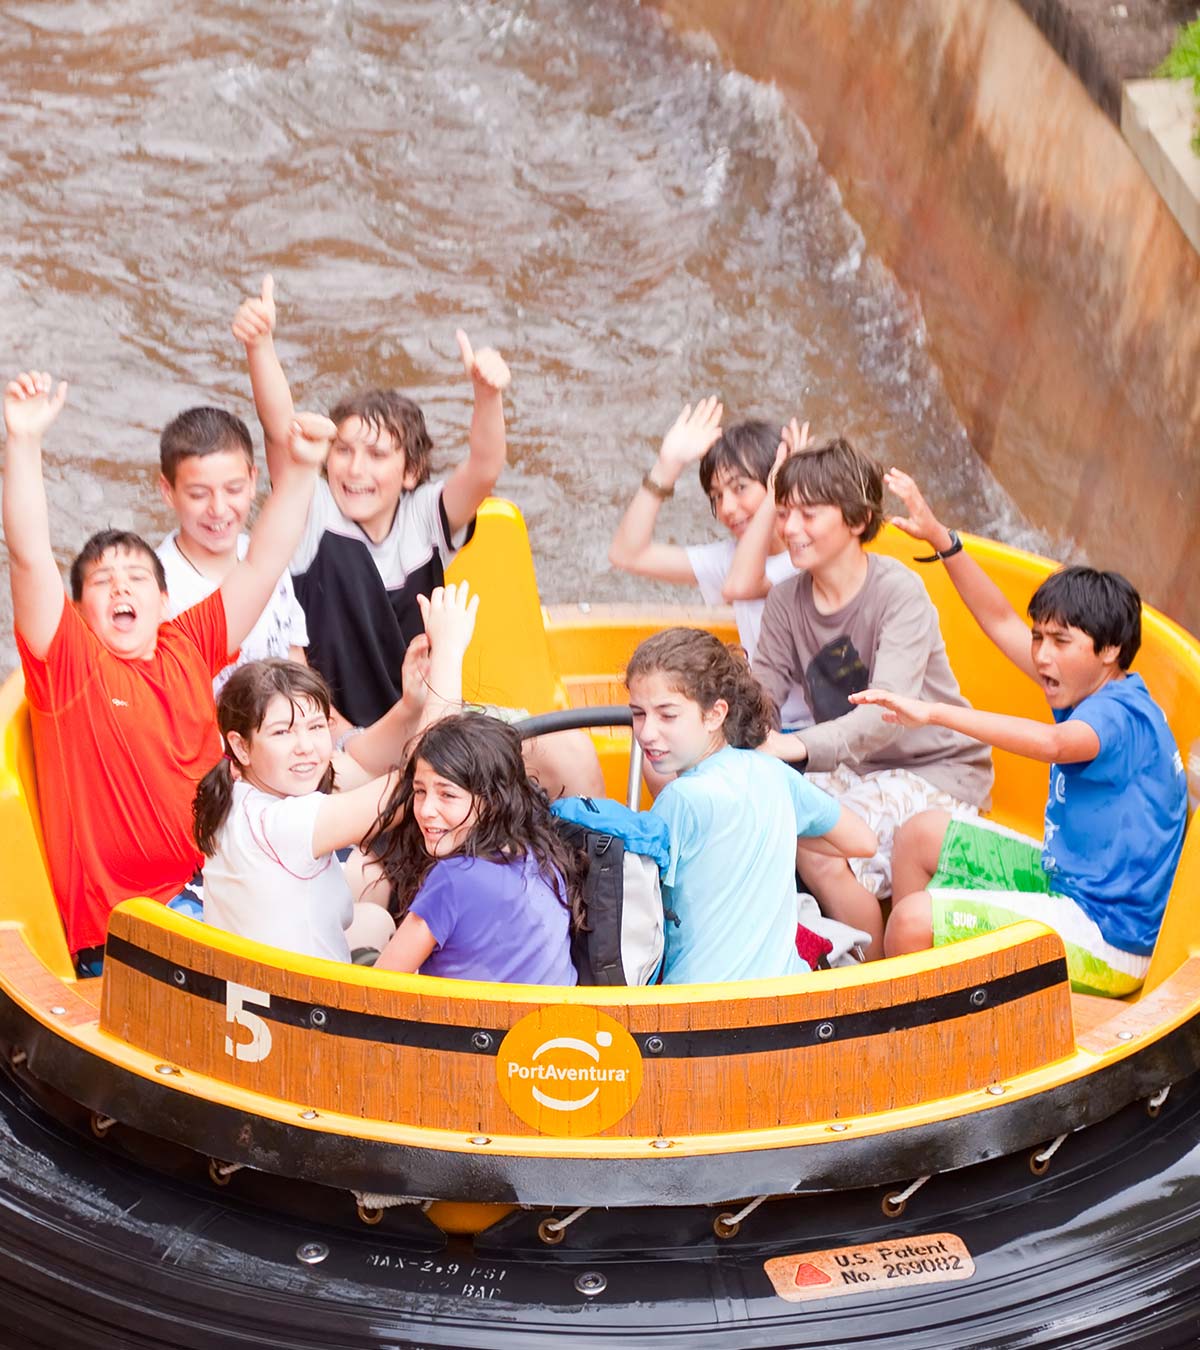 A group of friends are enjoying water rides